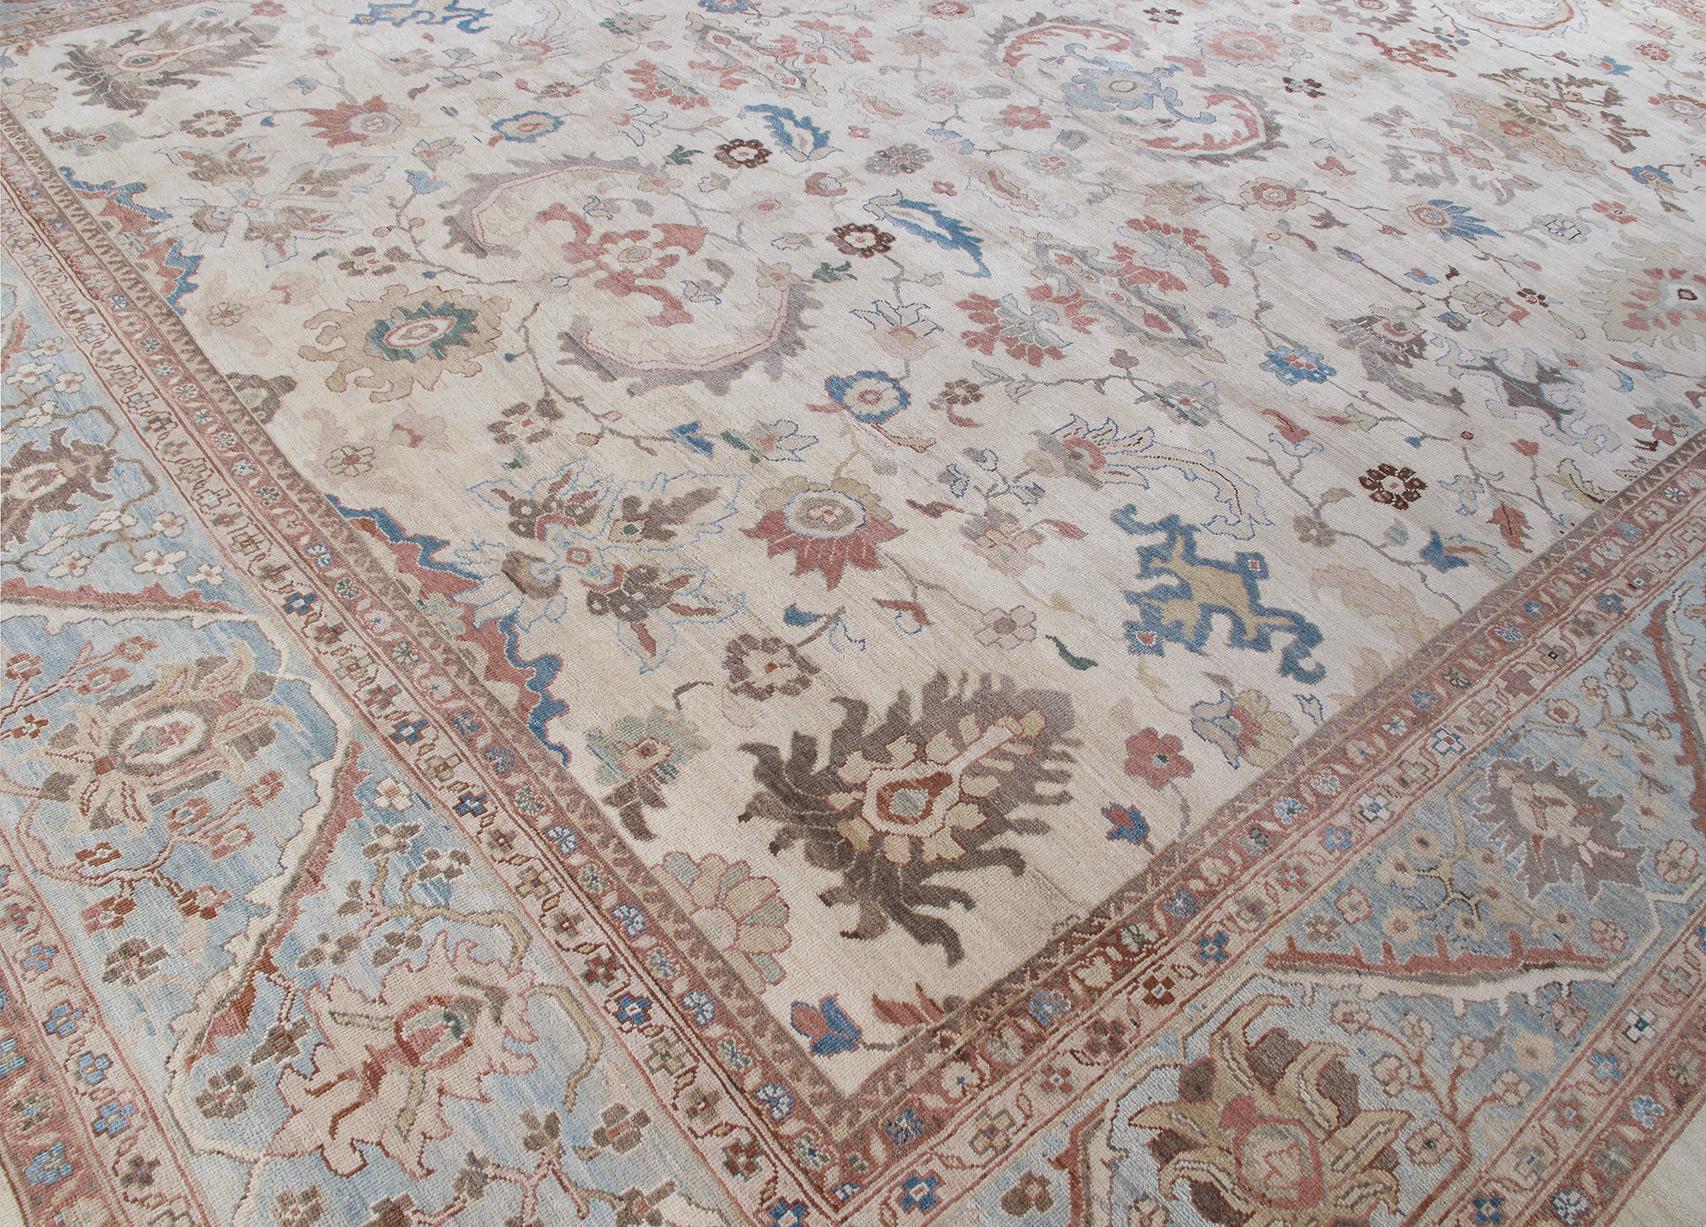 Made in Iran, this rug relates to the Zieglar Sultanabad collection: In 1875 the Anglo-Swiss company, Zieglar and Co. produced carpets in the Western region of Persia. They married tradition with innovation by employing designers from New York and